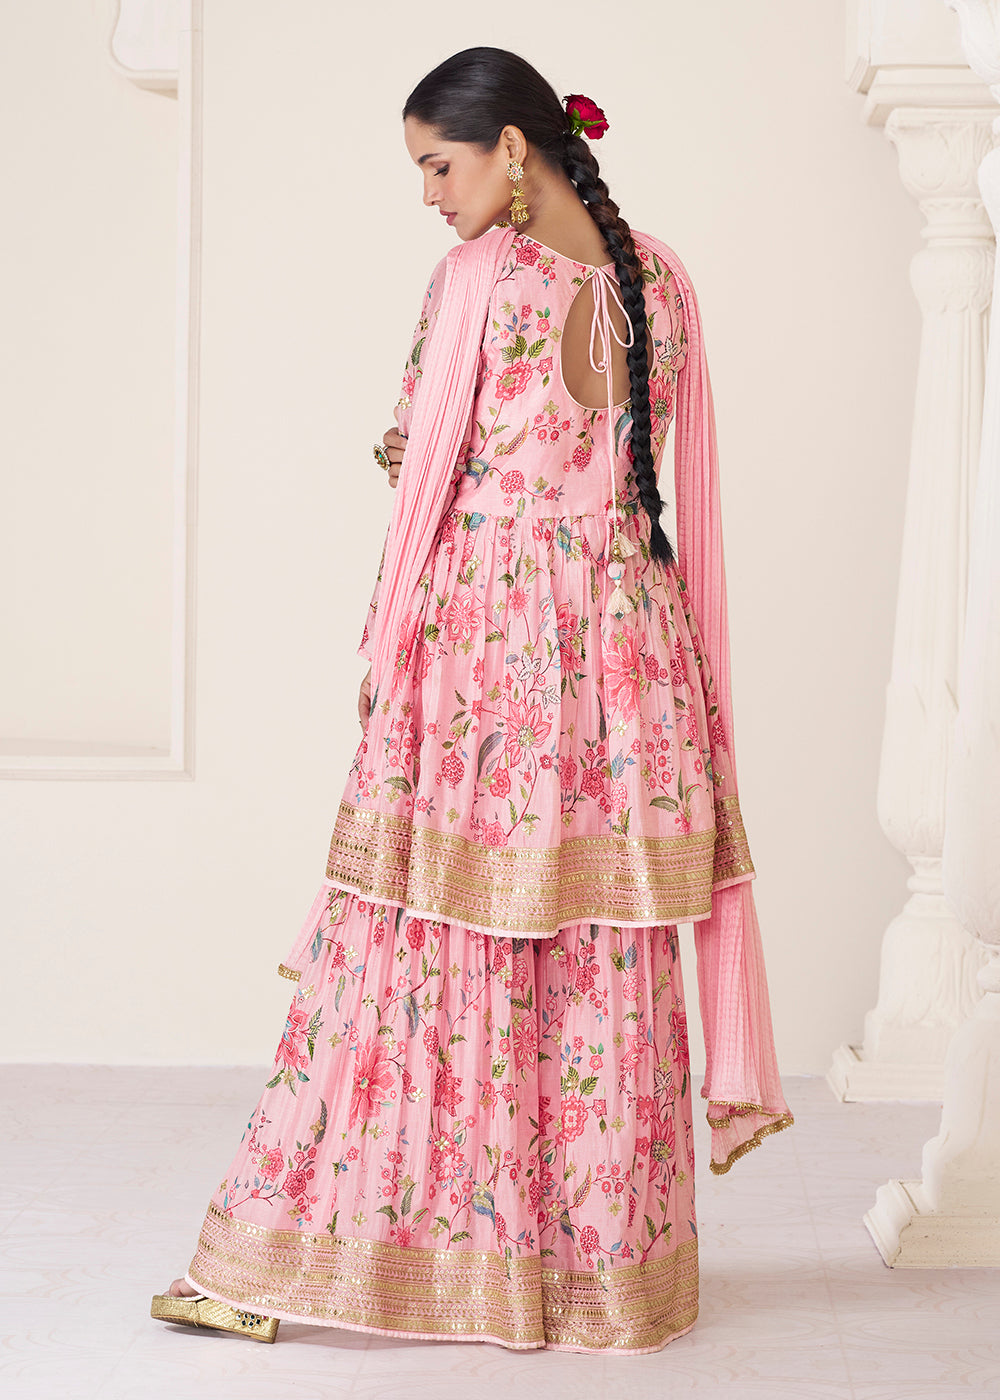 Shop Now Floral Printed Pink Premium Organza Silk Gharara Style Suit Online at Empress Clothing in USA, UK, Canada, Italy & Worldwide.